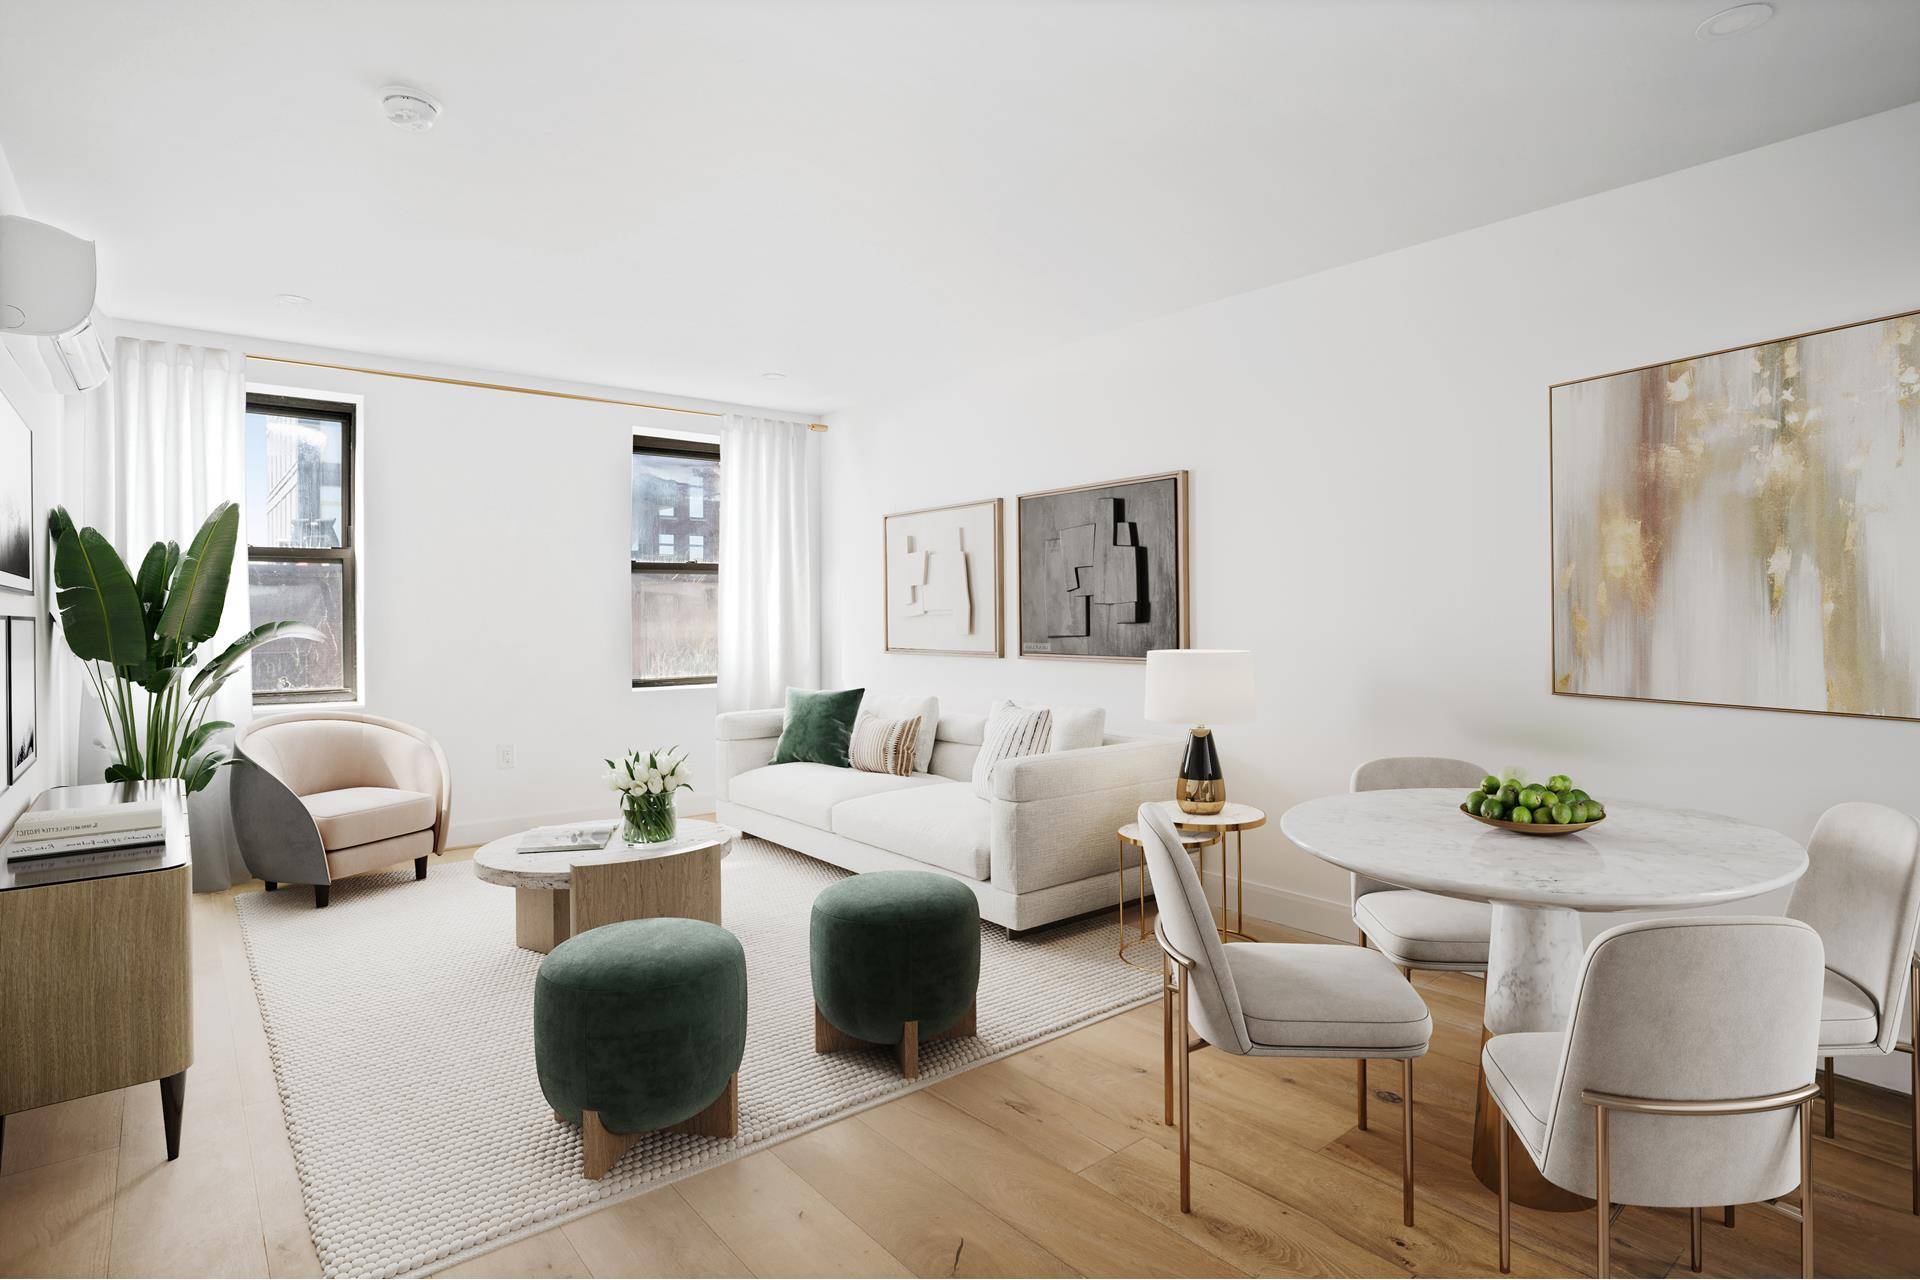 115 Pacific Street is a collection of five brand new, fully renovated rental apartments in the sought after Cobble Hill Neighborhood.